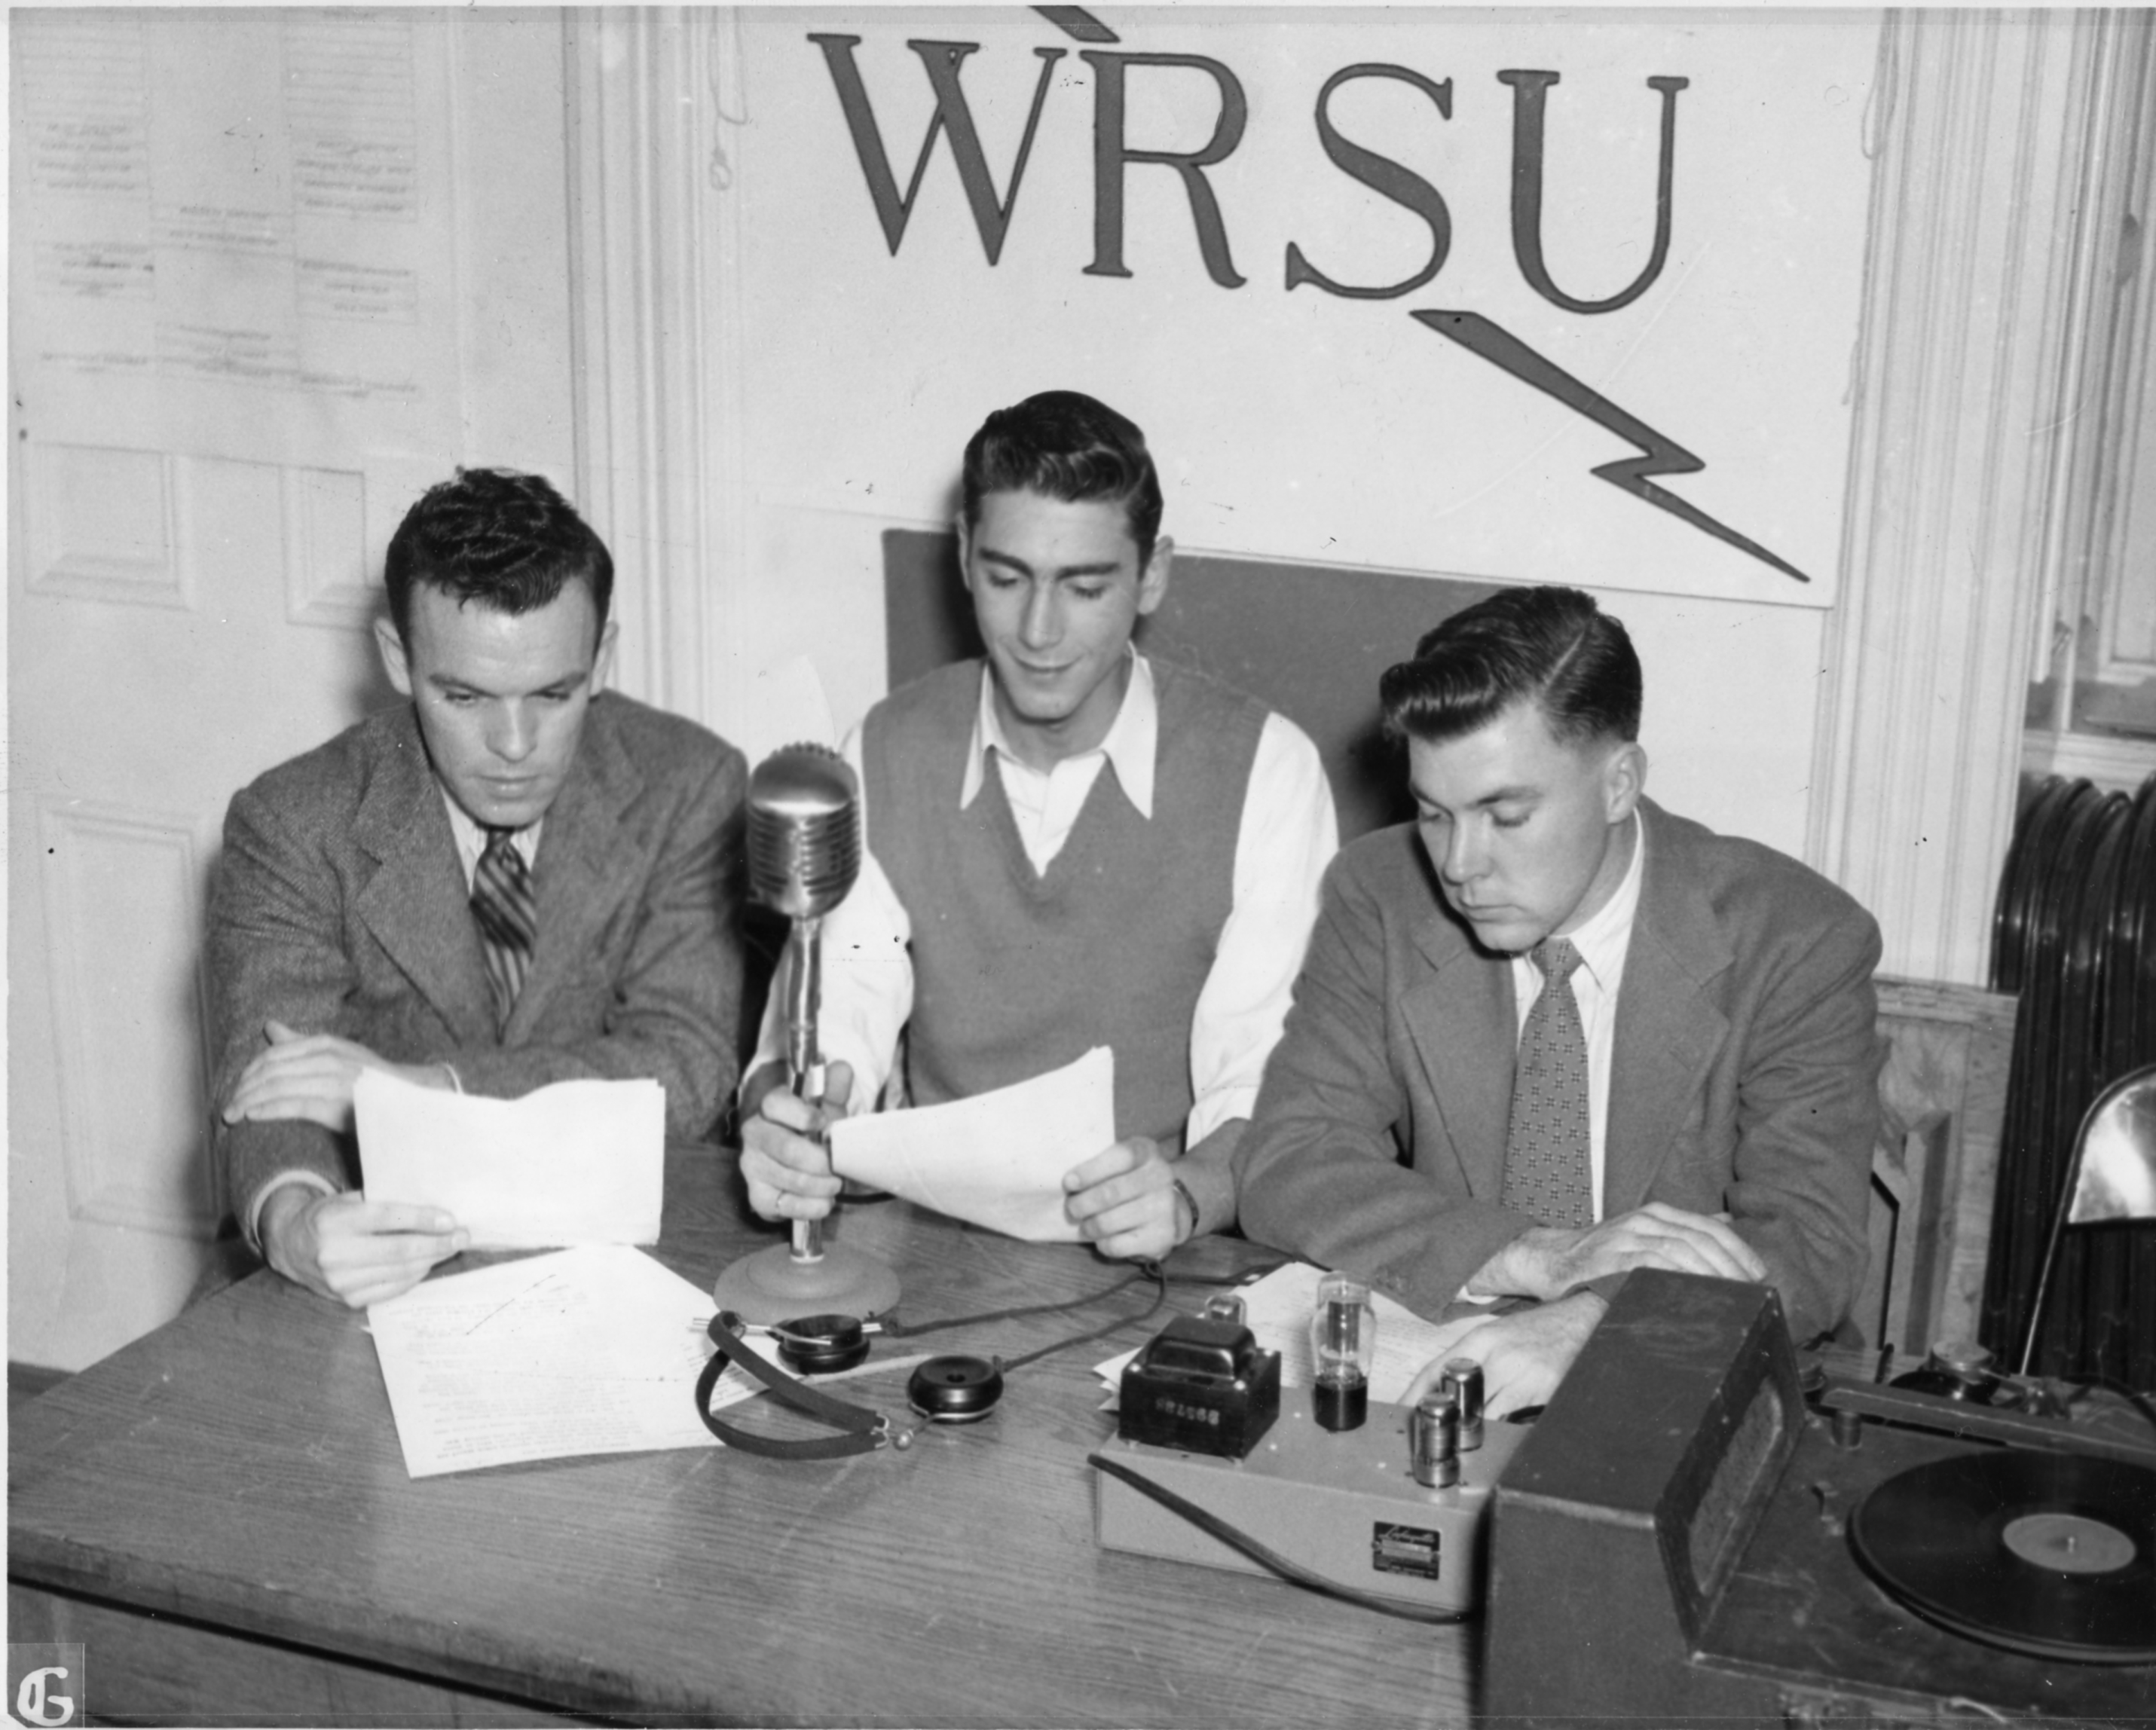 1948 - WRSU on the Air